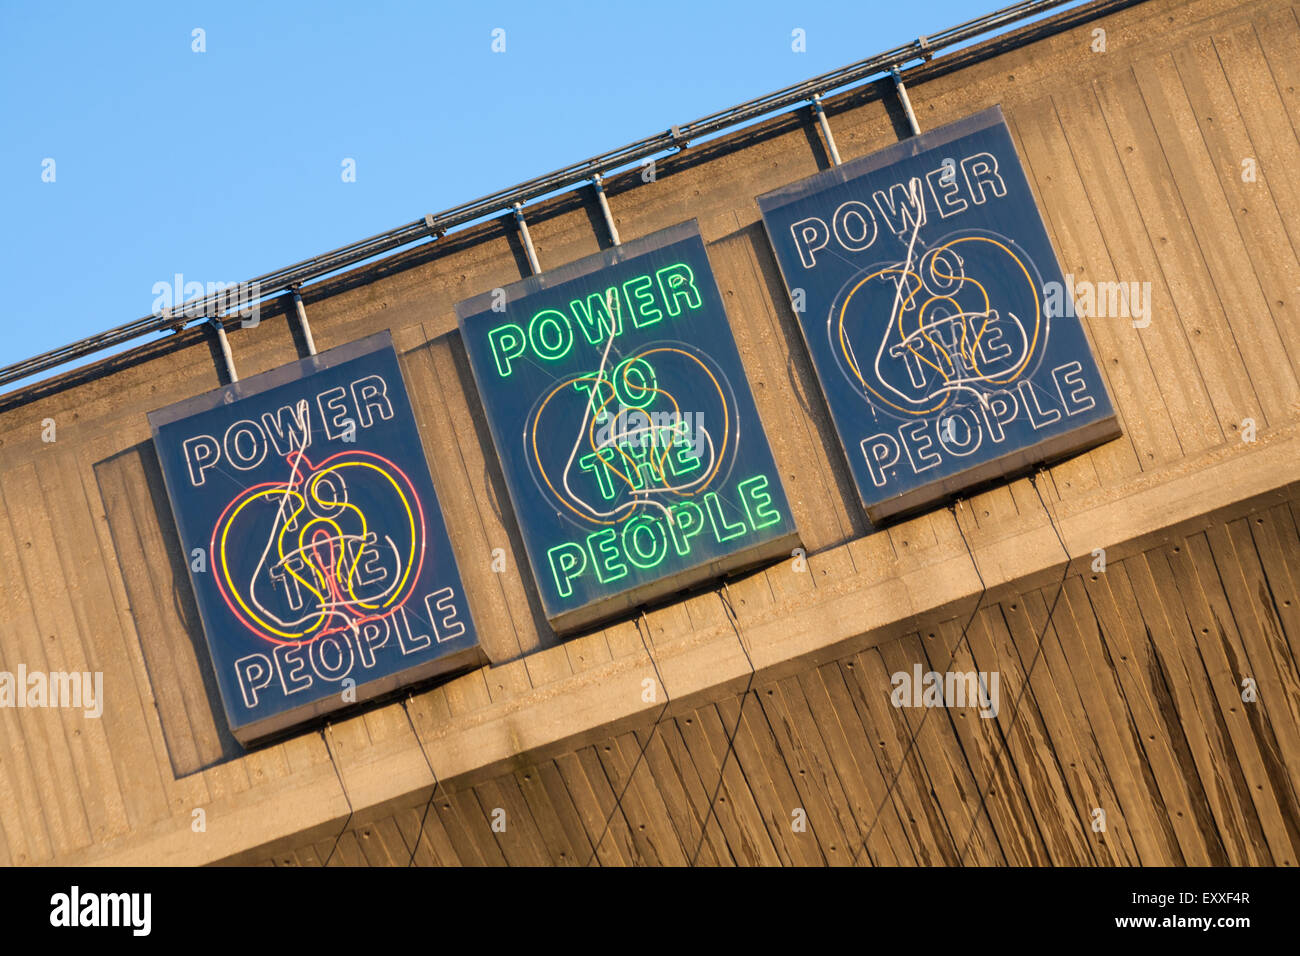 Power to the People neon lit signs at Purcell Room, Queen Elizabeth Hall, South Bank, London in May Stock Photo